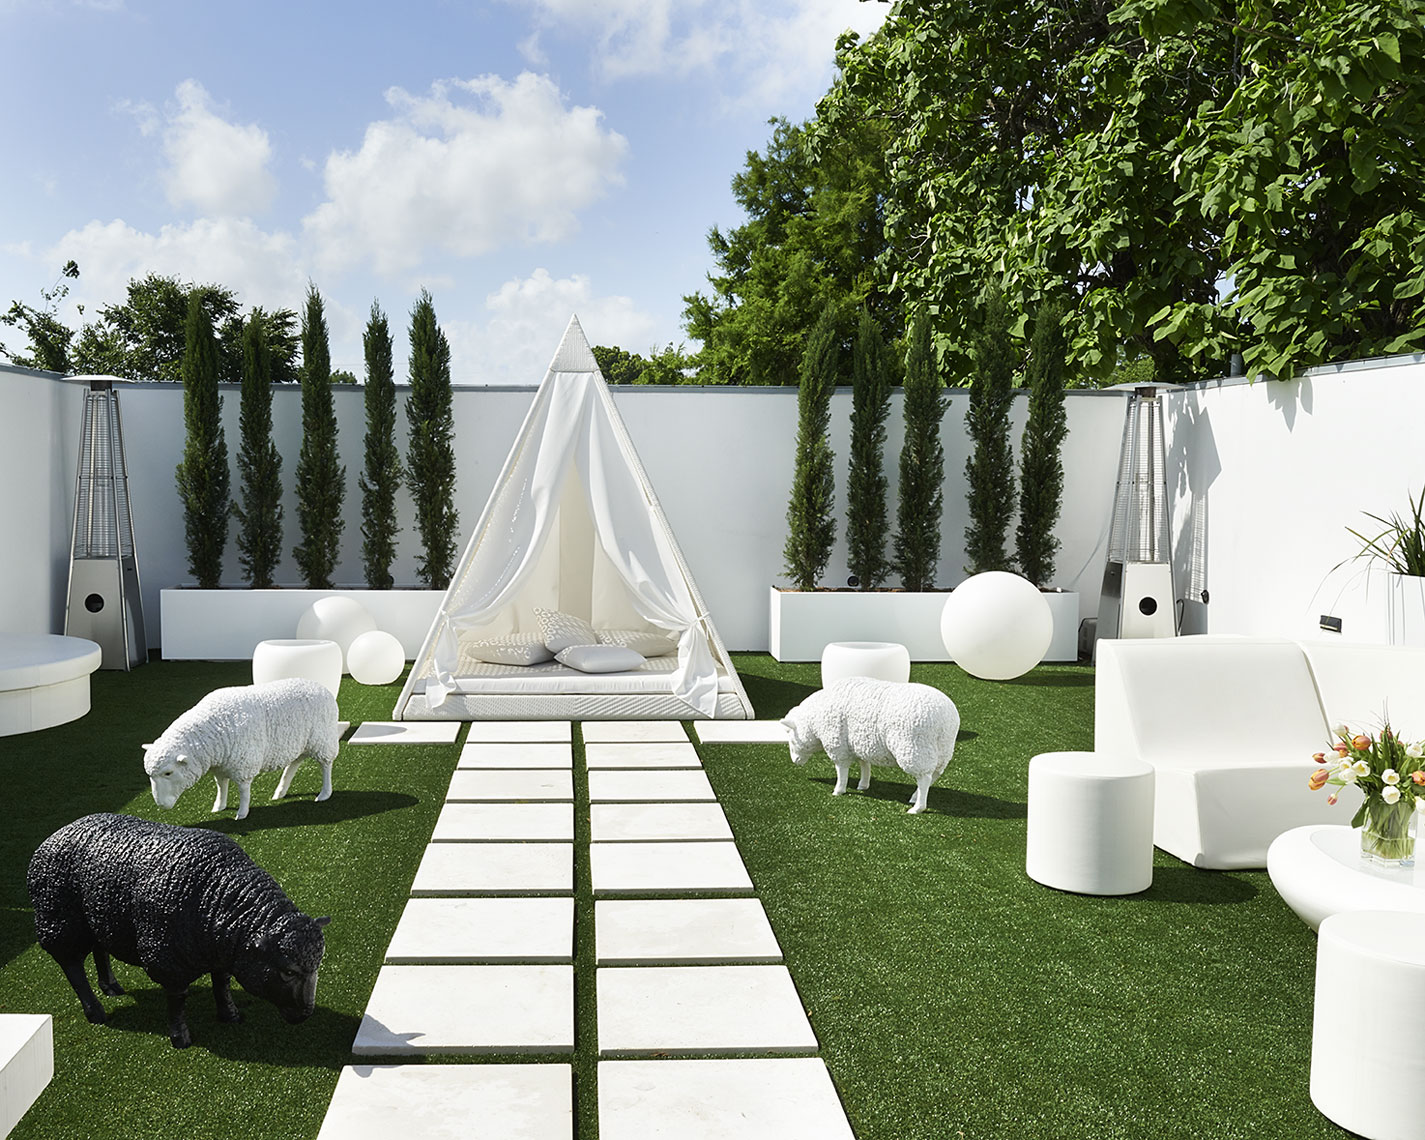 Villa Vicci outdoor seating area with tent by Alison Gootee Photography